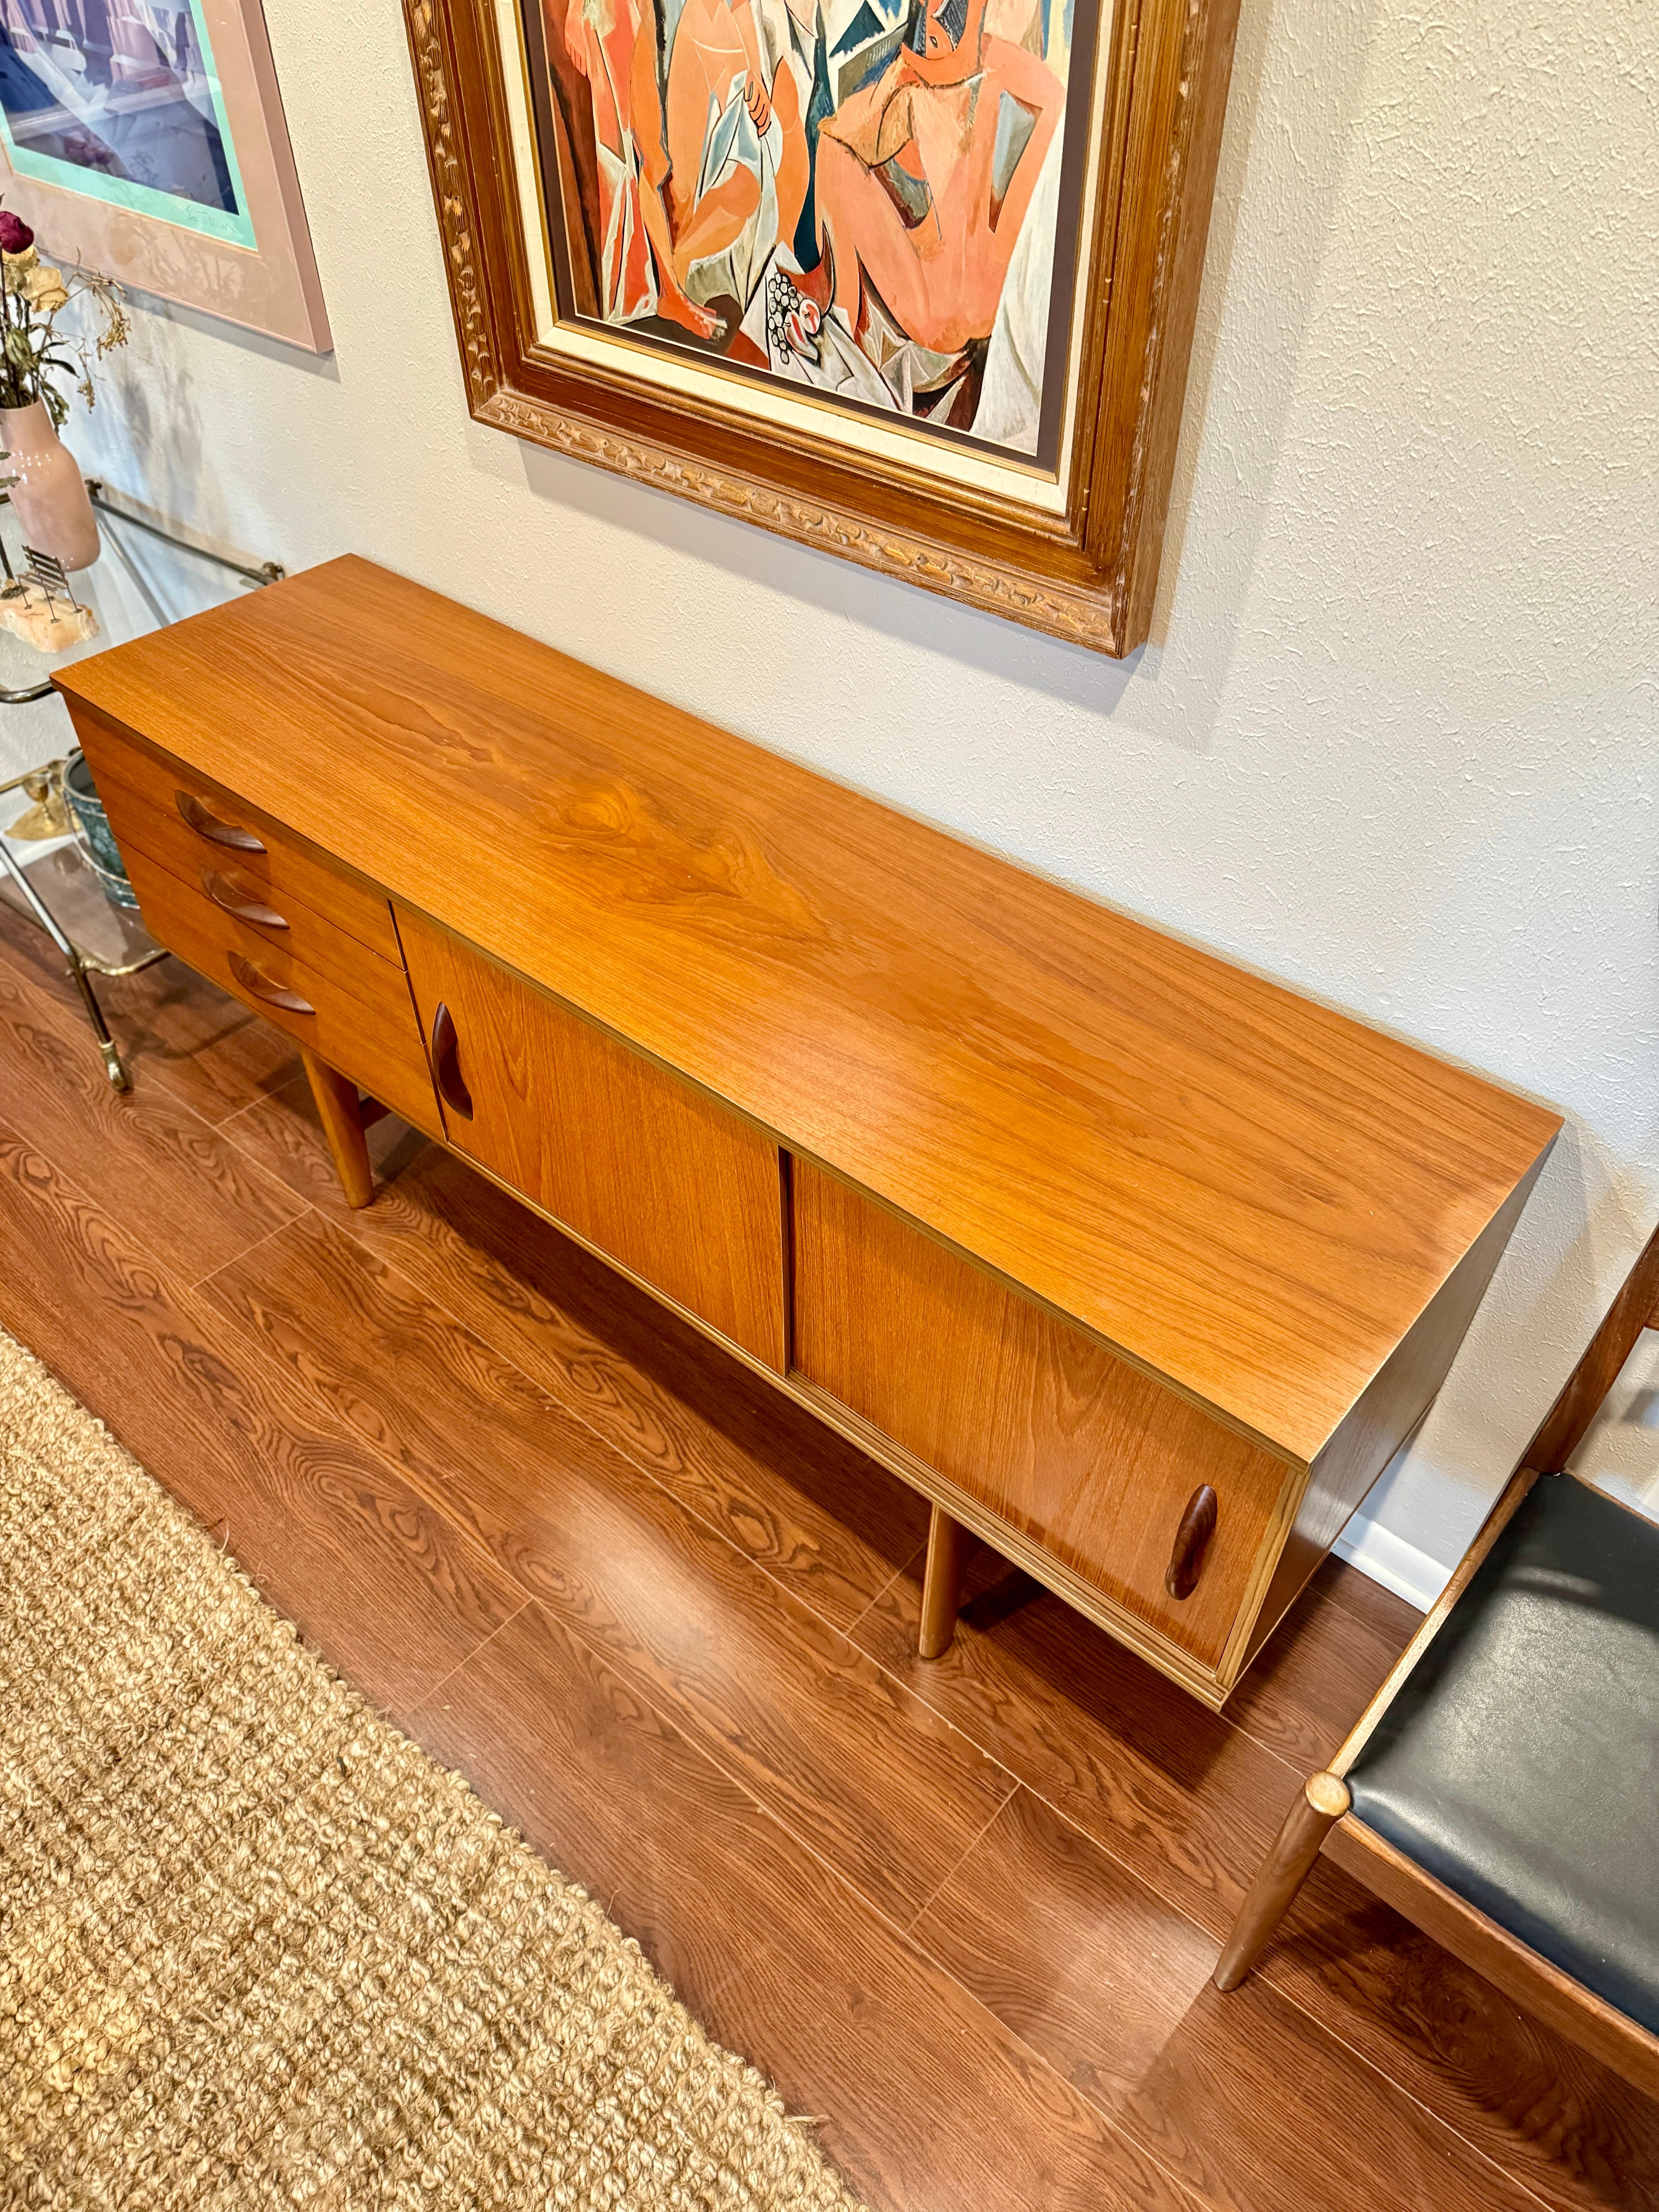 Mid century modern sideboard by Avalon, circa 1960s. This is a fine example of Avalon design, a small sideboard with clean lines and distinctive curved solid teak handles. This piece has sliding doors and plenty of storage space. All drawers open